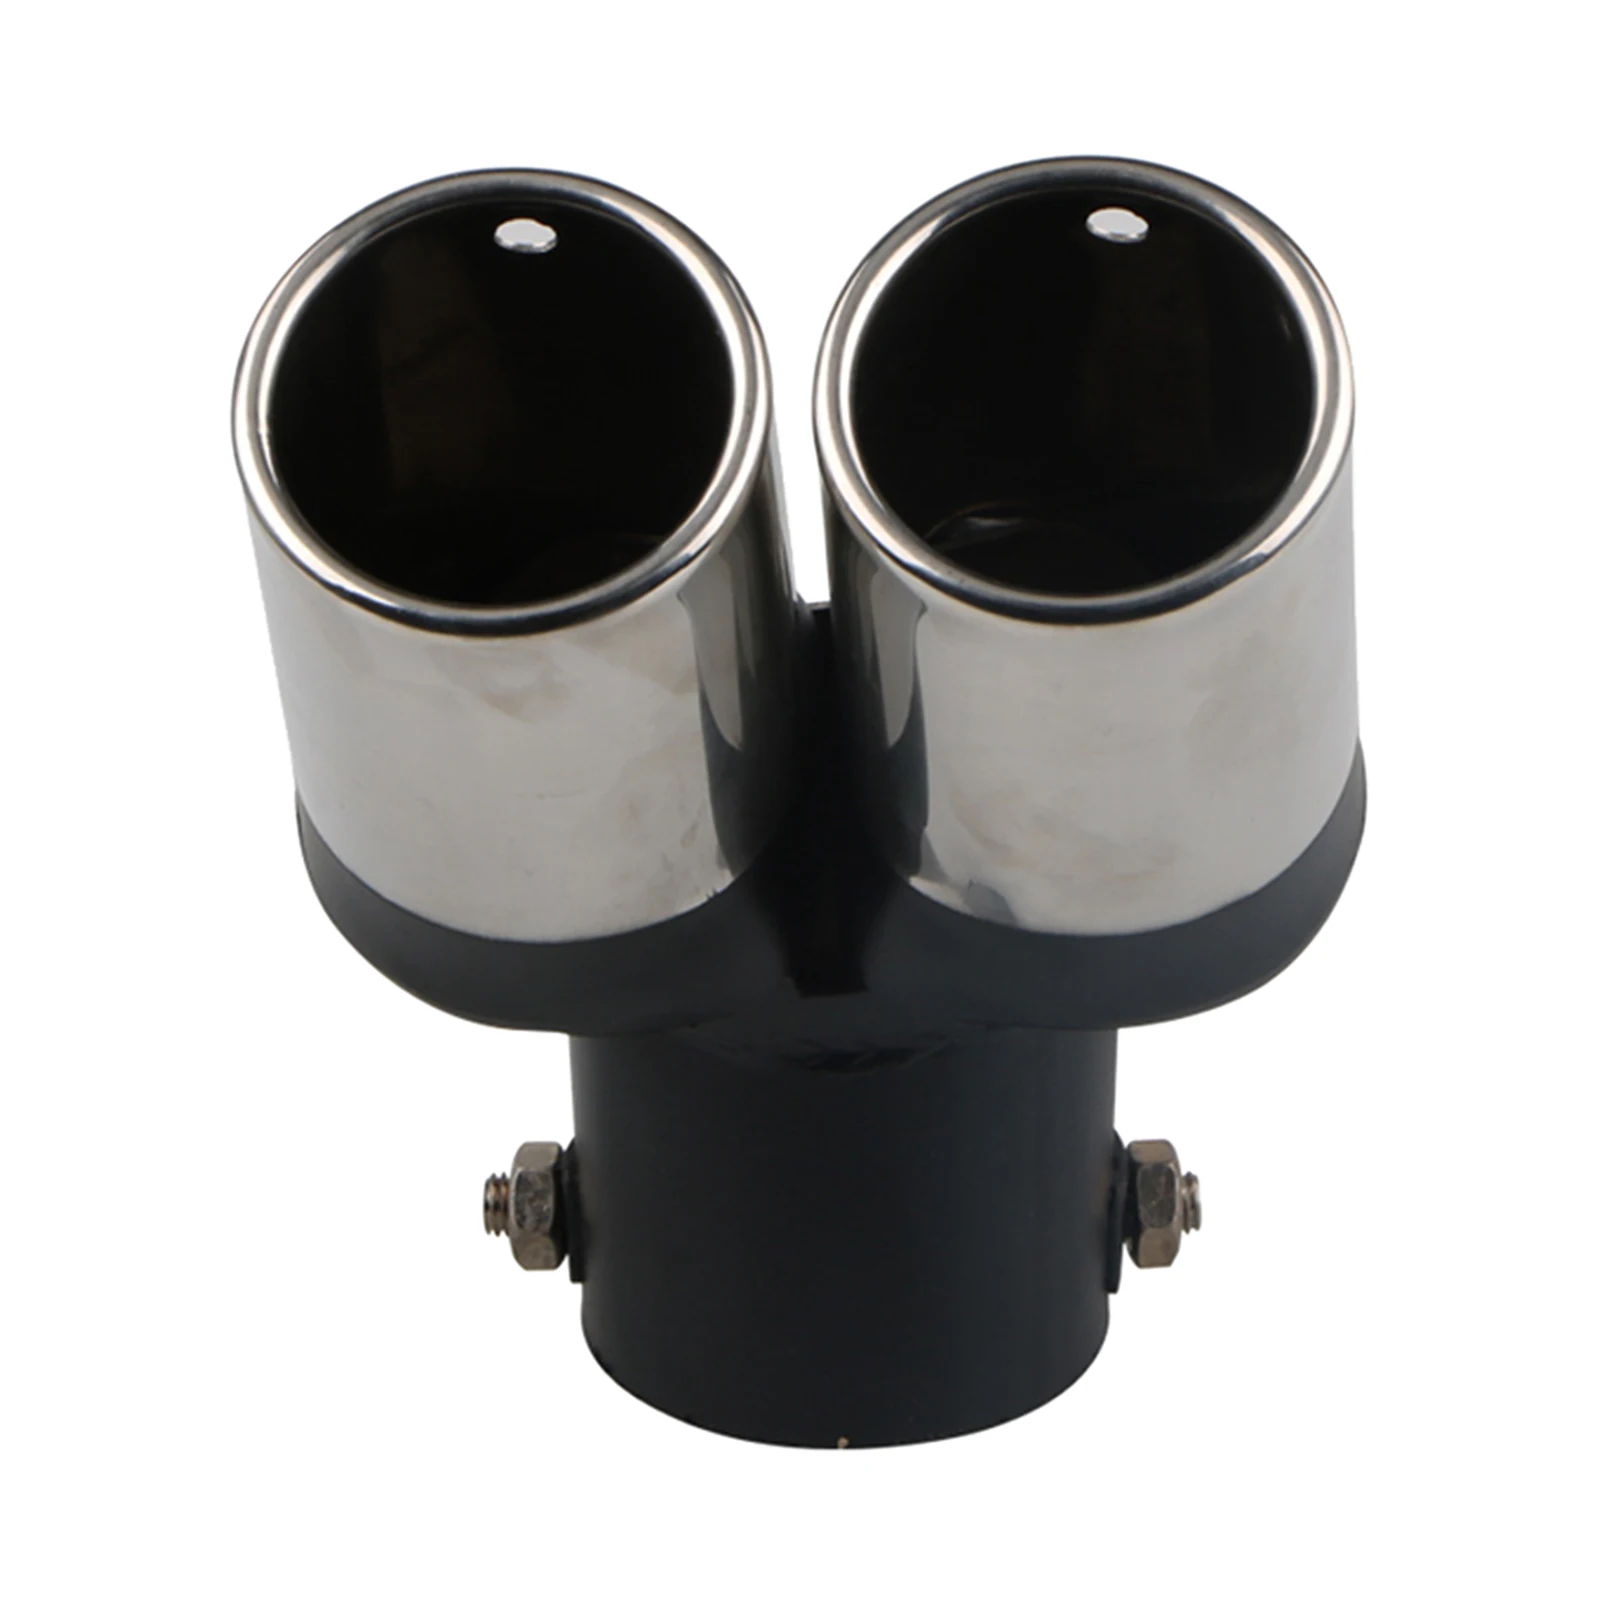 Universal Car Exhaust Tail Pipe Stainless Steel End Accessory